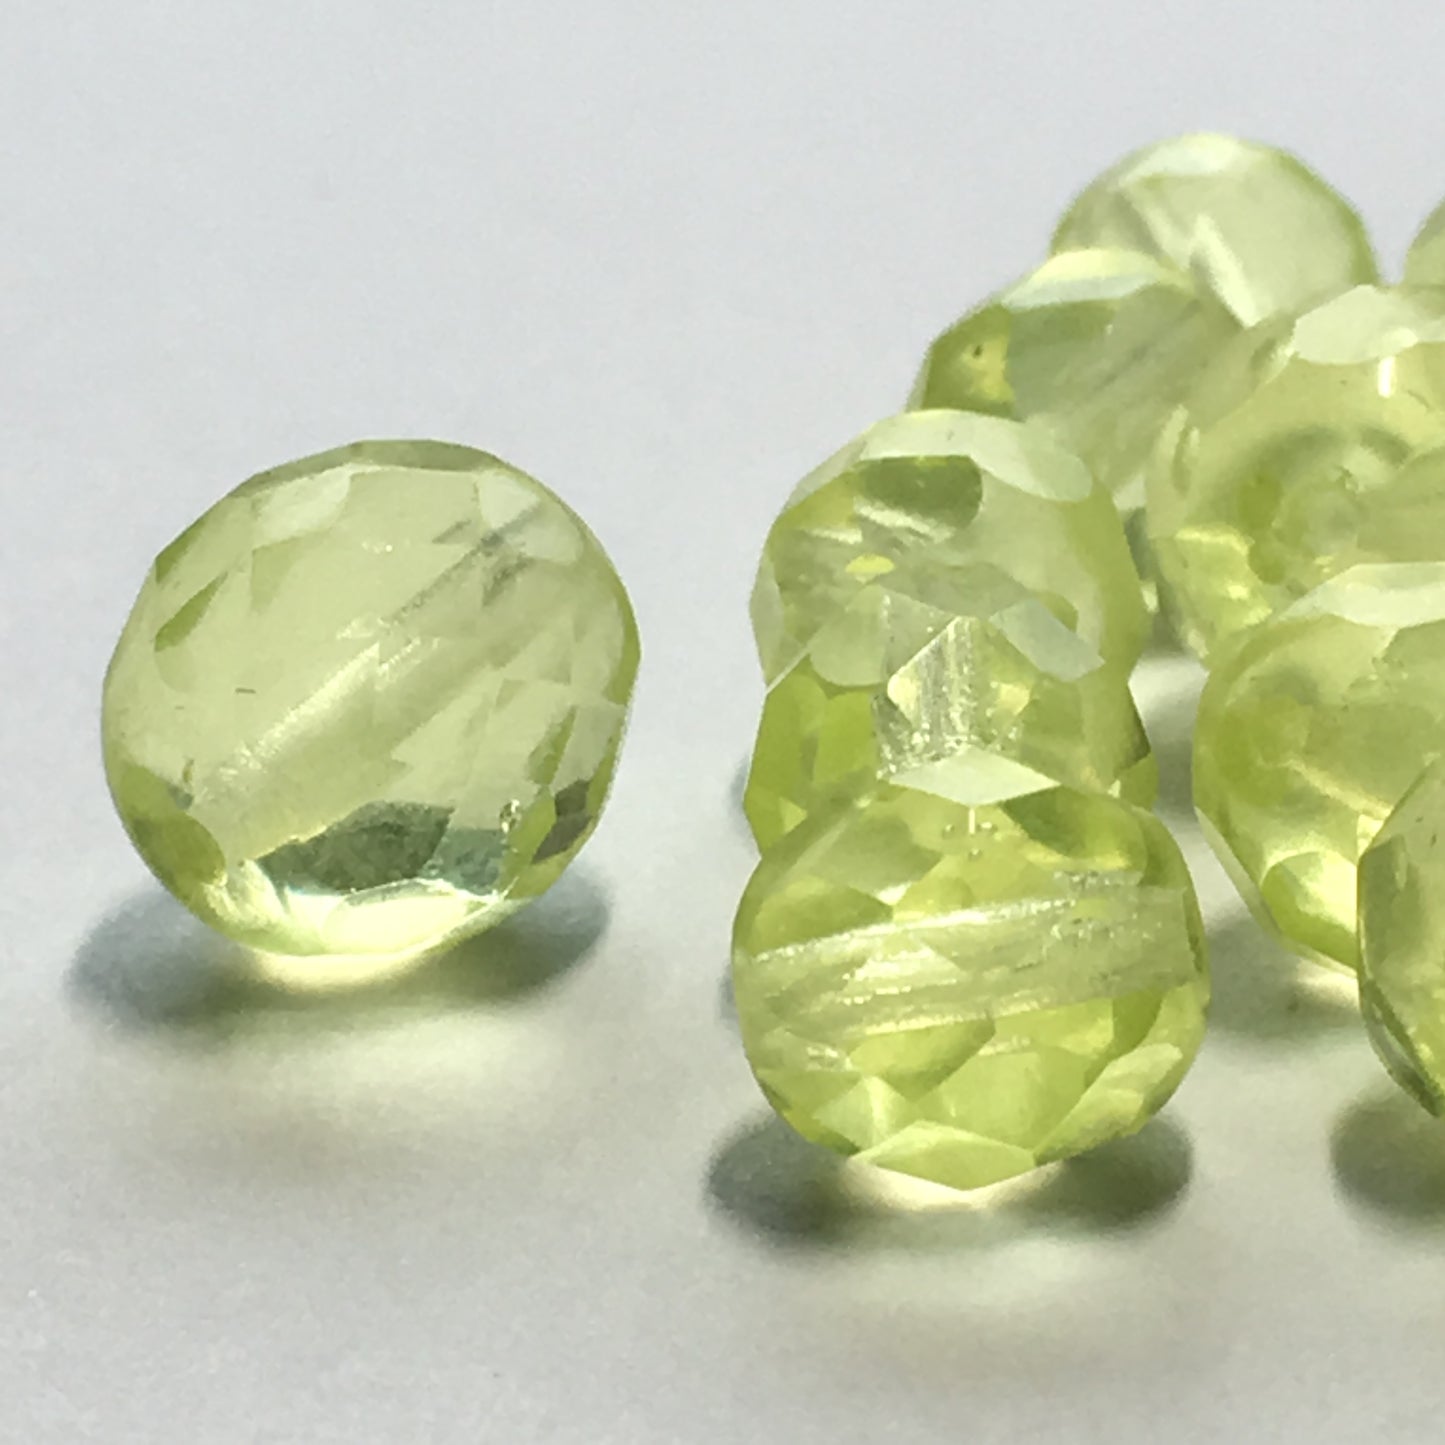 Transparent Yellow Glass Faceted Round Beads, 8 and 10 mm, 17 Beads